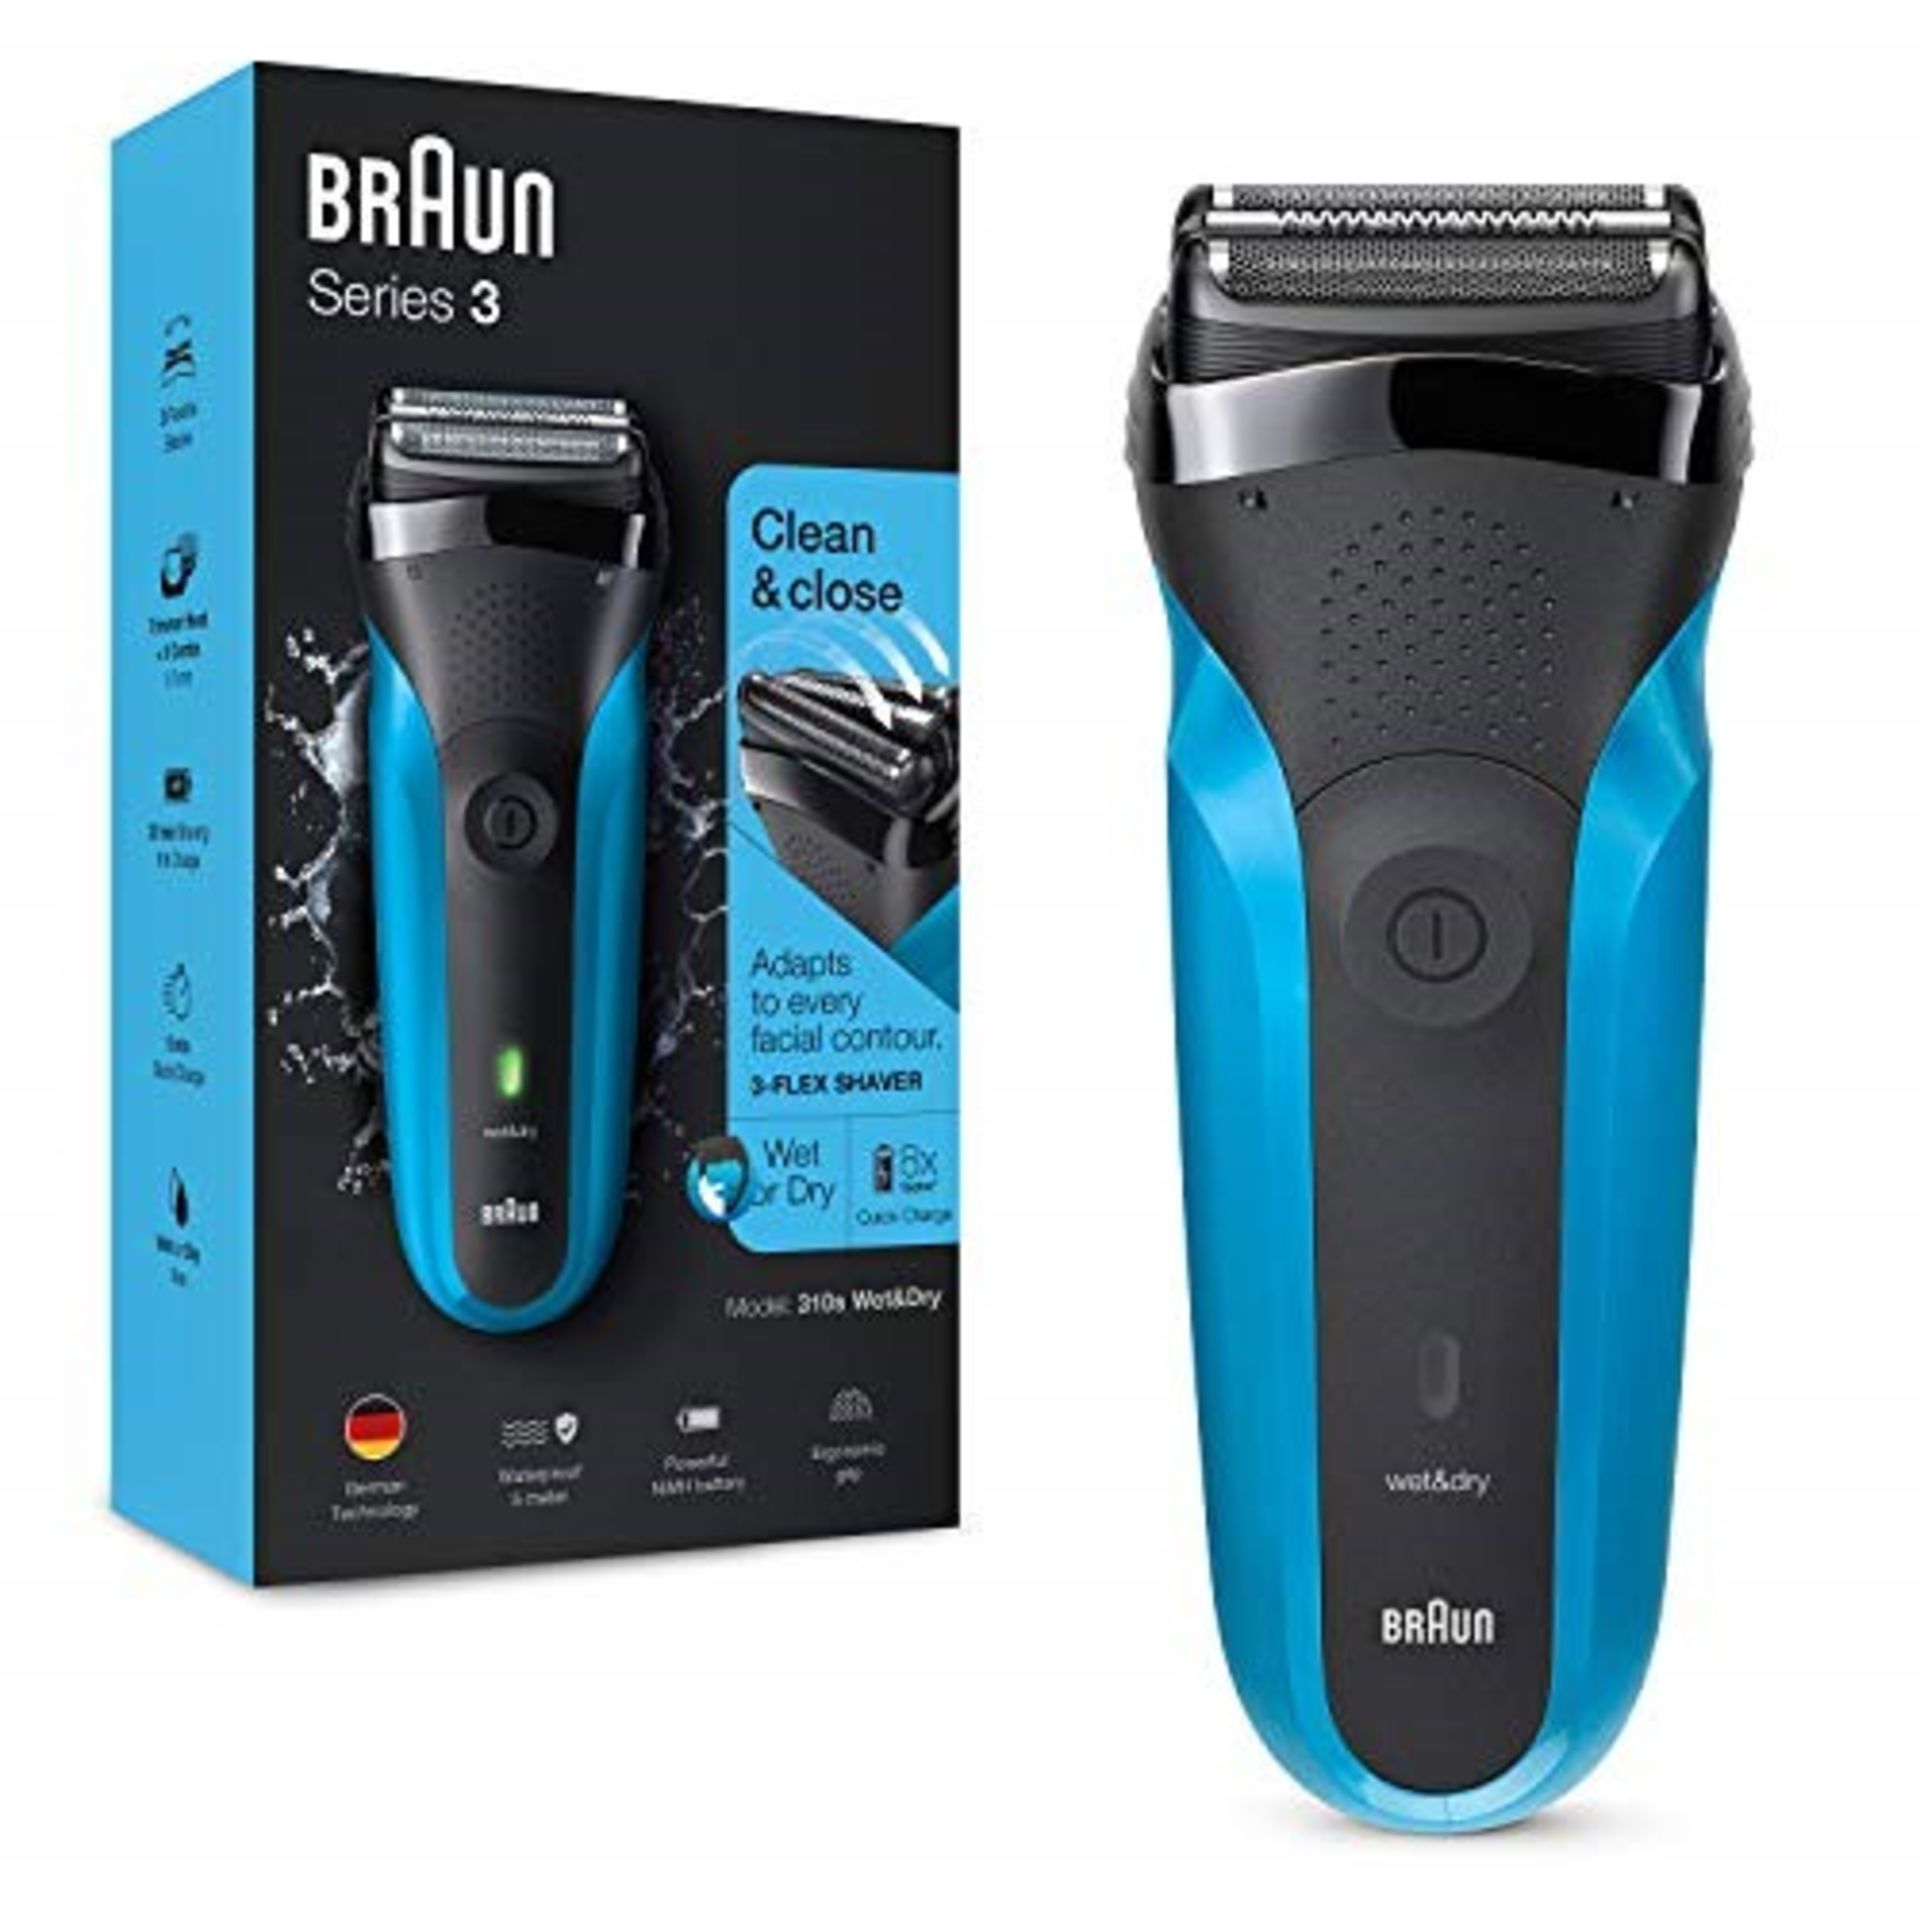 Braun Series 3 310 Electric Shaver Wet & Dry Electric Razor for Men with 3 Flexible Bl